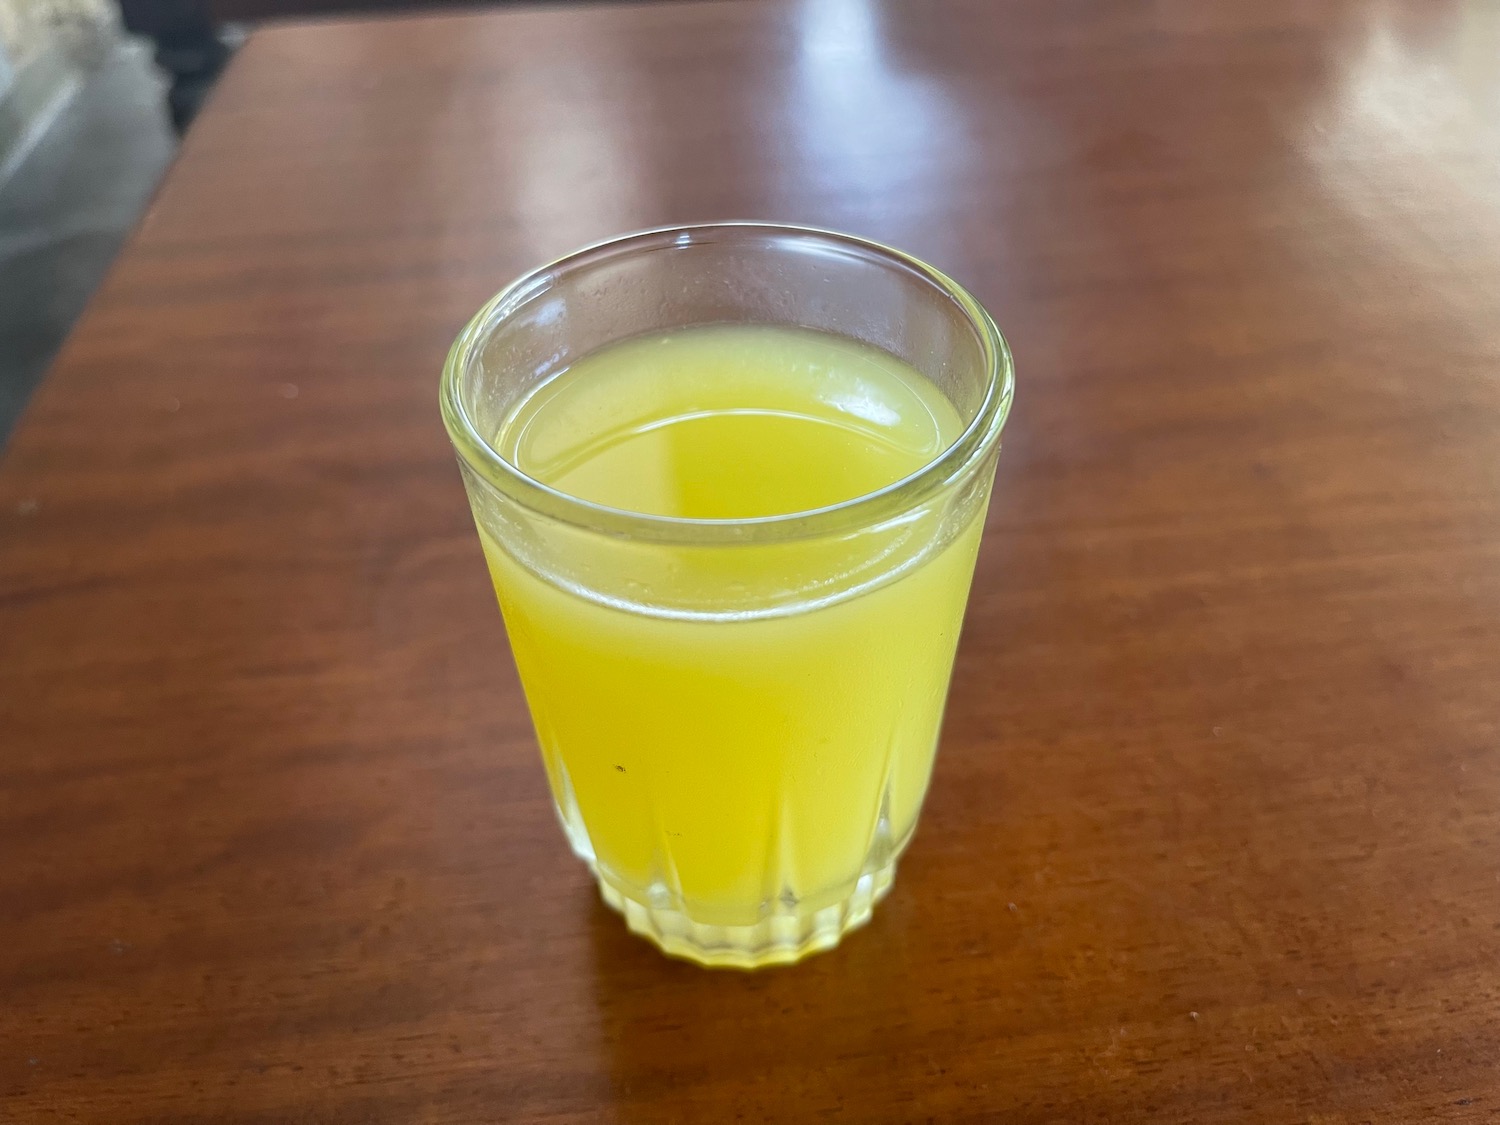 a glass of yellow liquid on a table